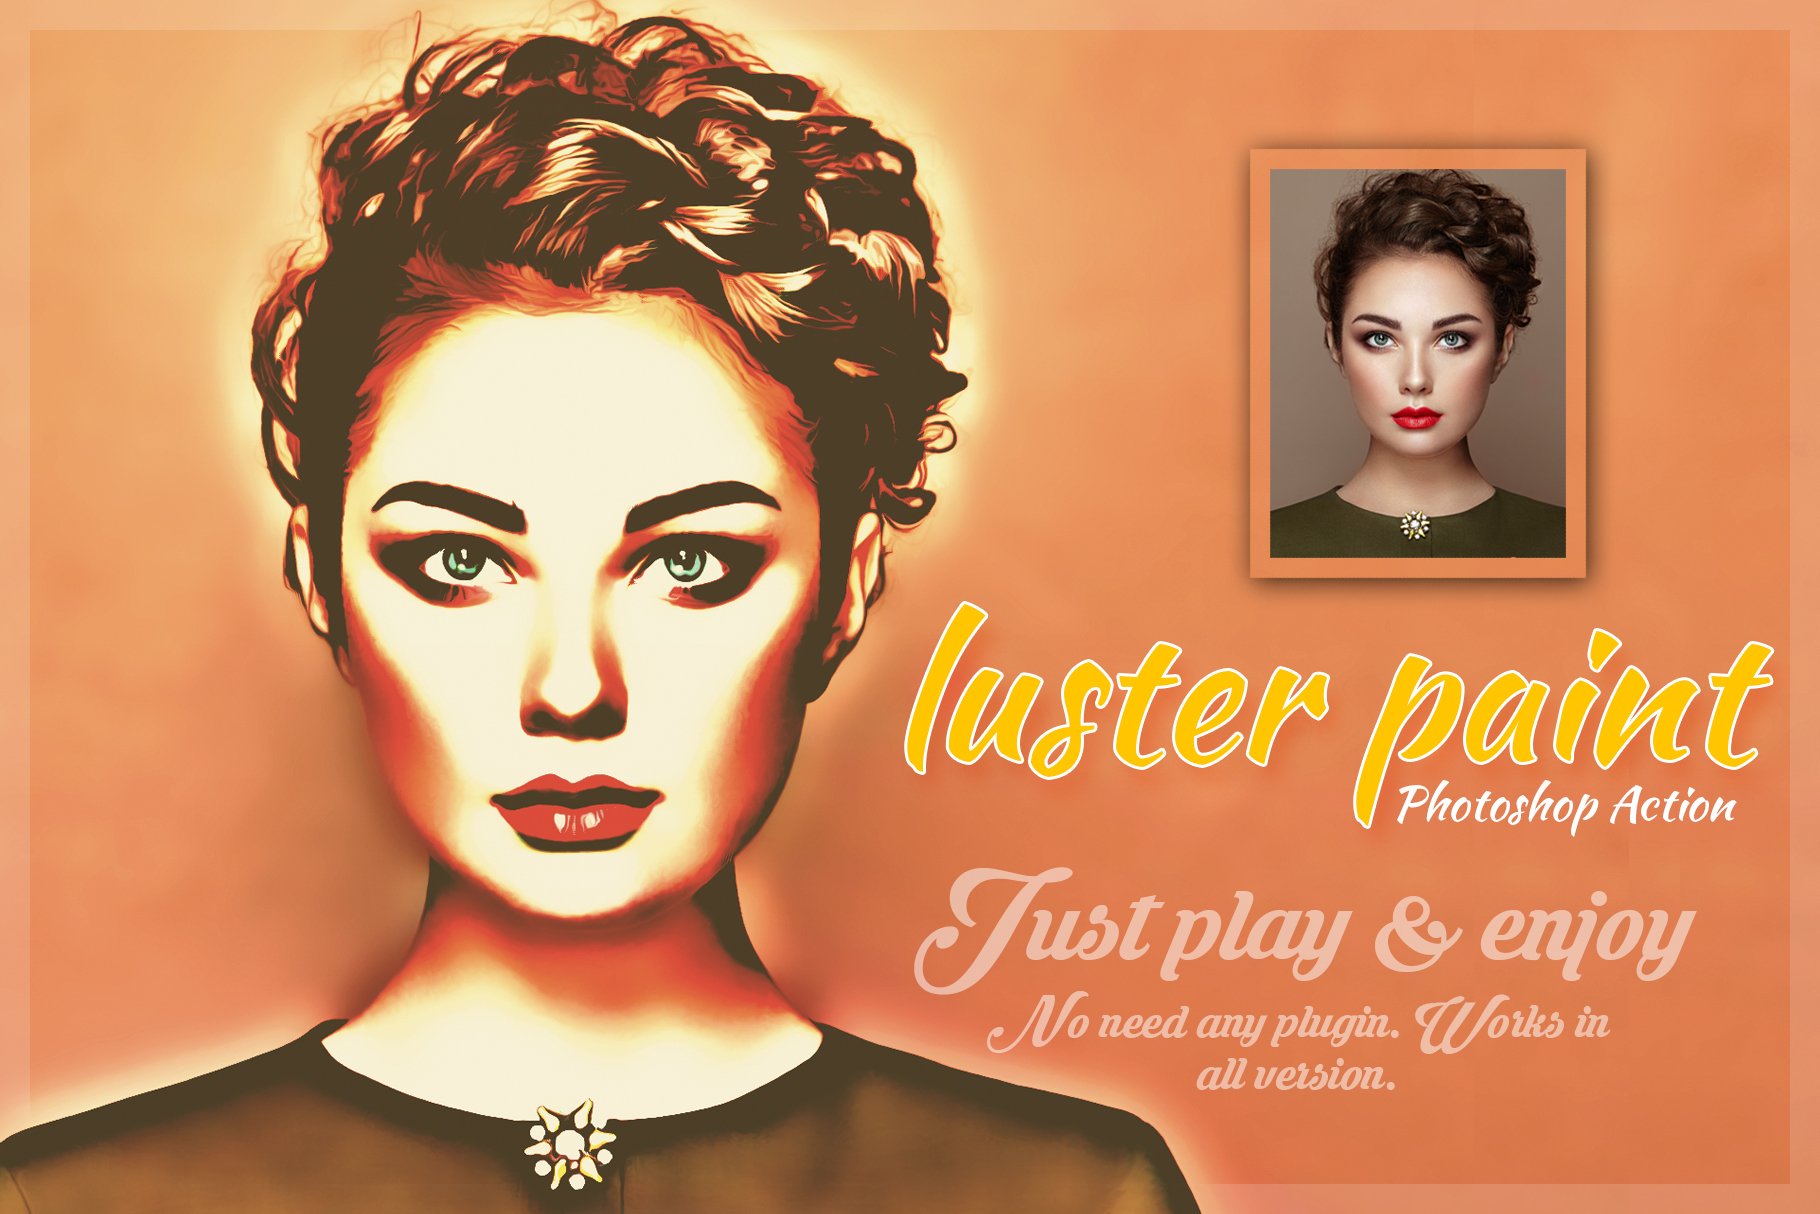 Luster Paint Photoshop Actioncover image.